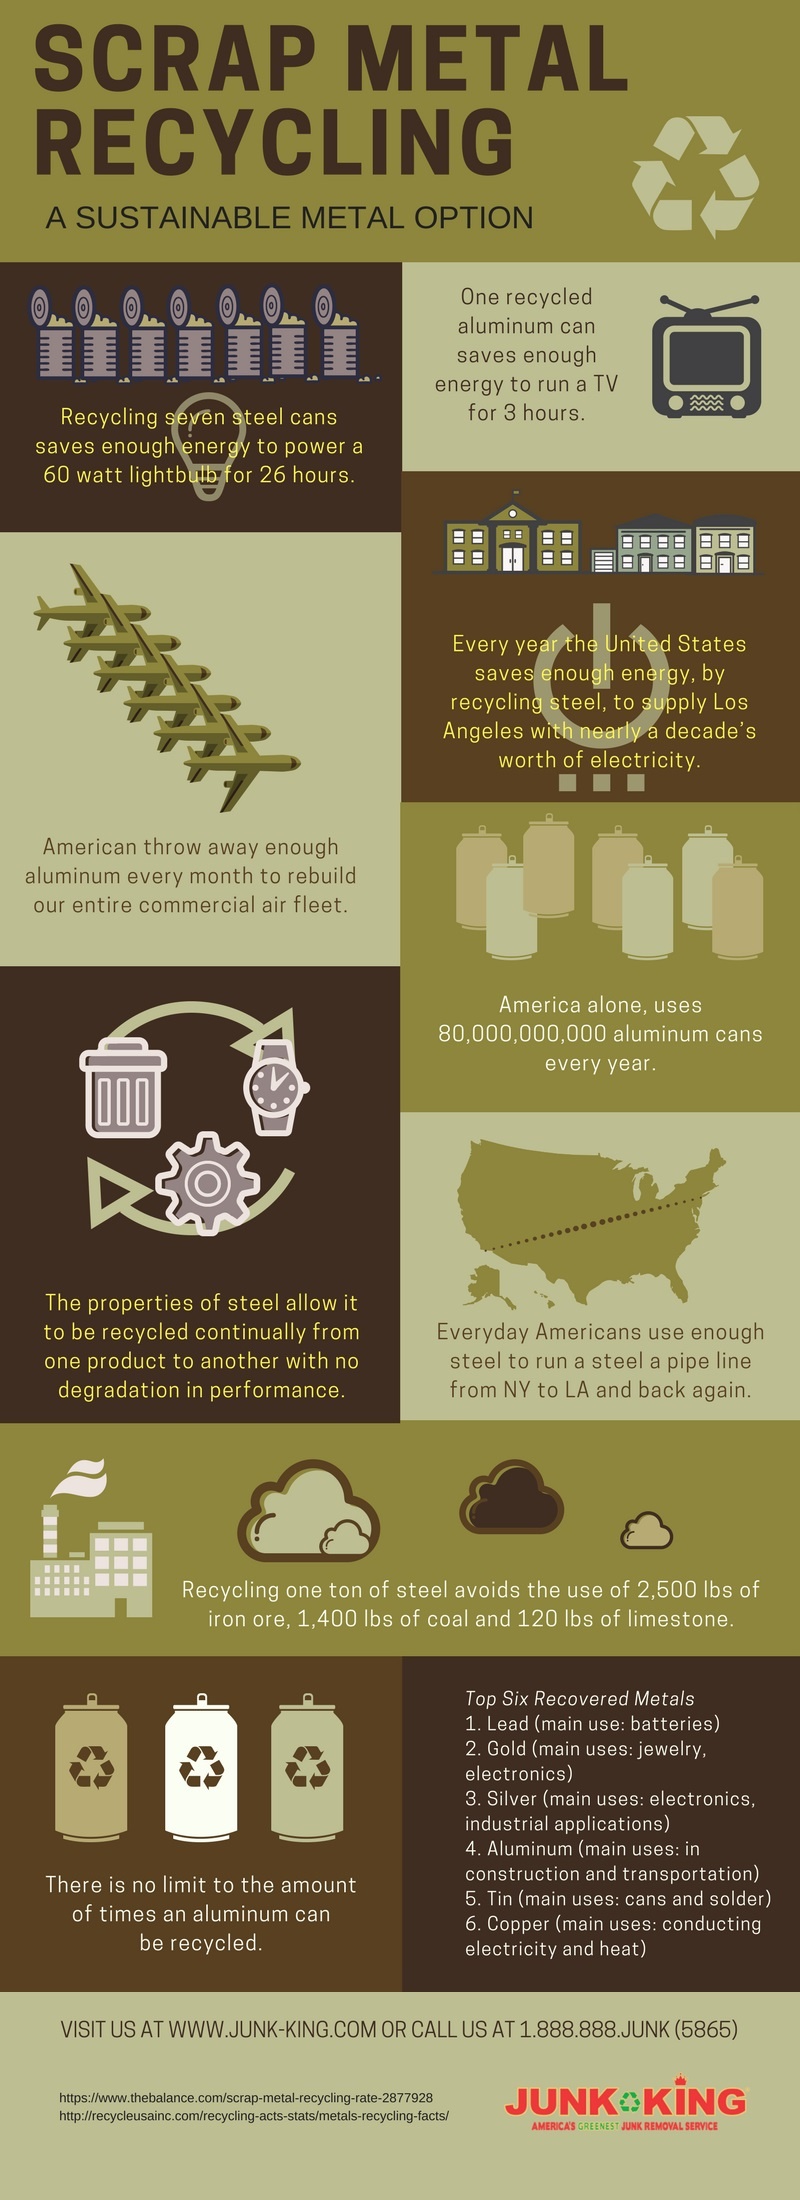 scrap-metal-recycling-infographic